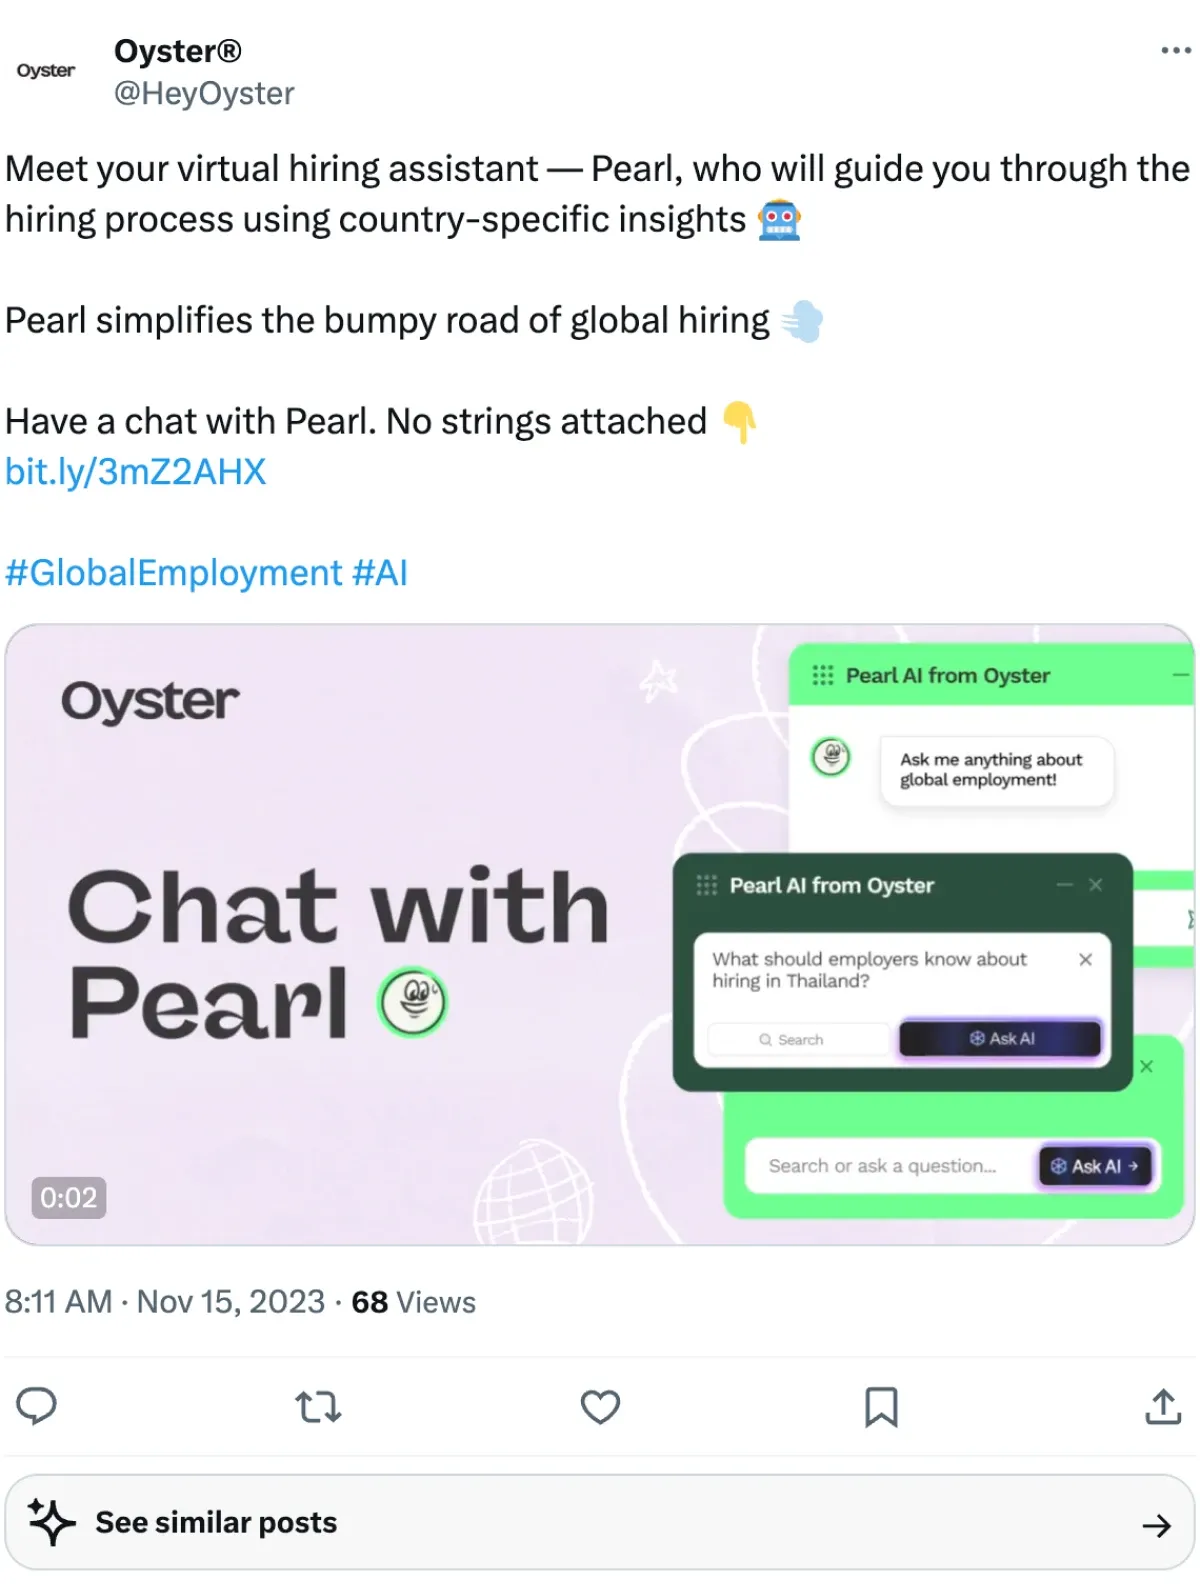 Oyster HR Social Media Post for AI announcement